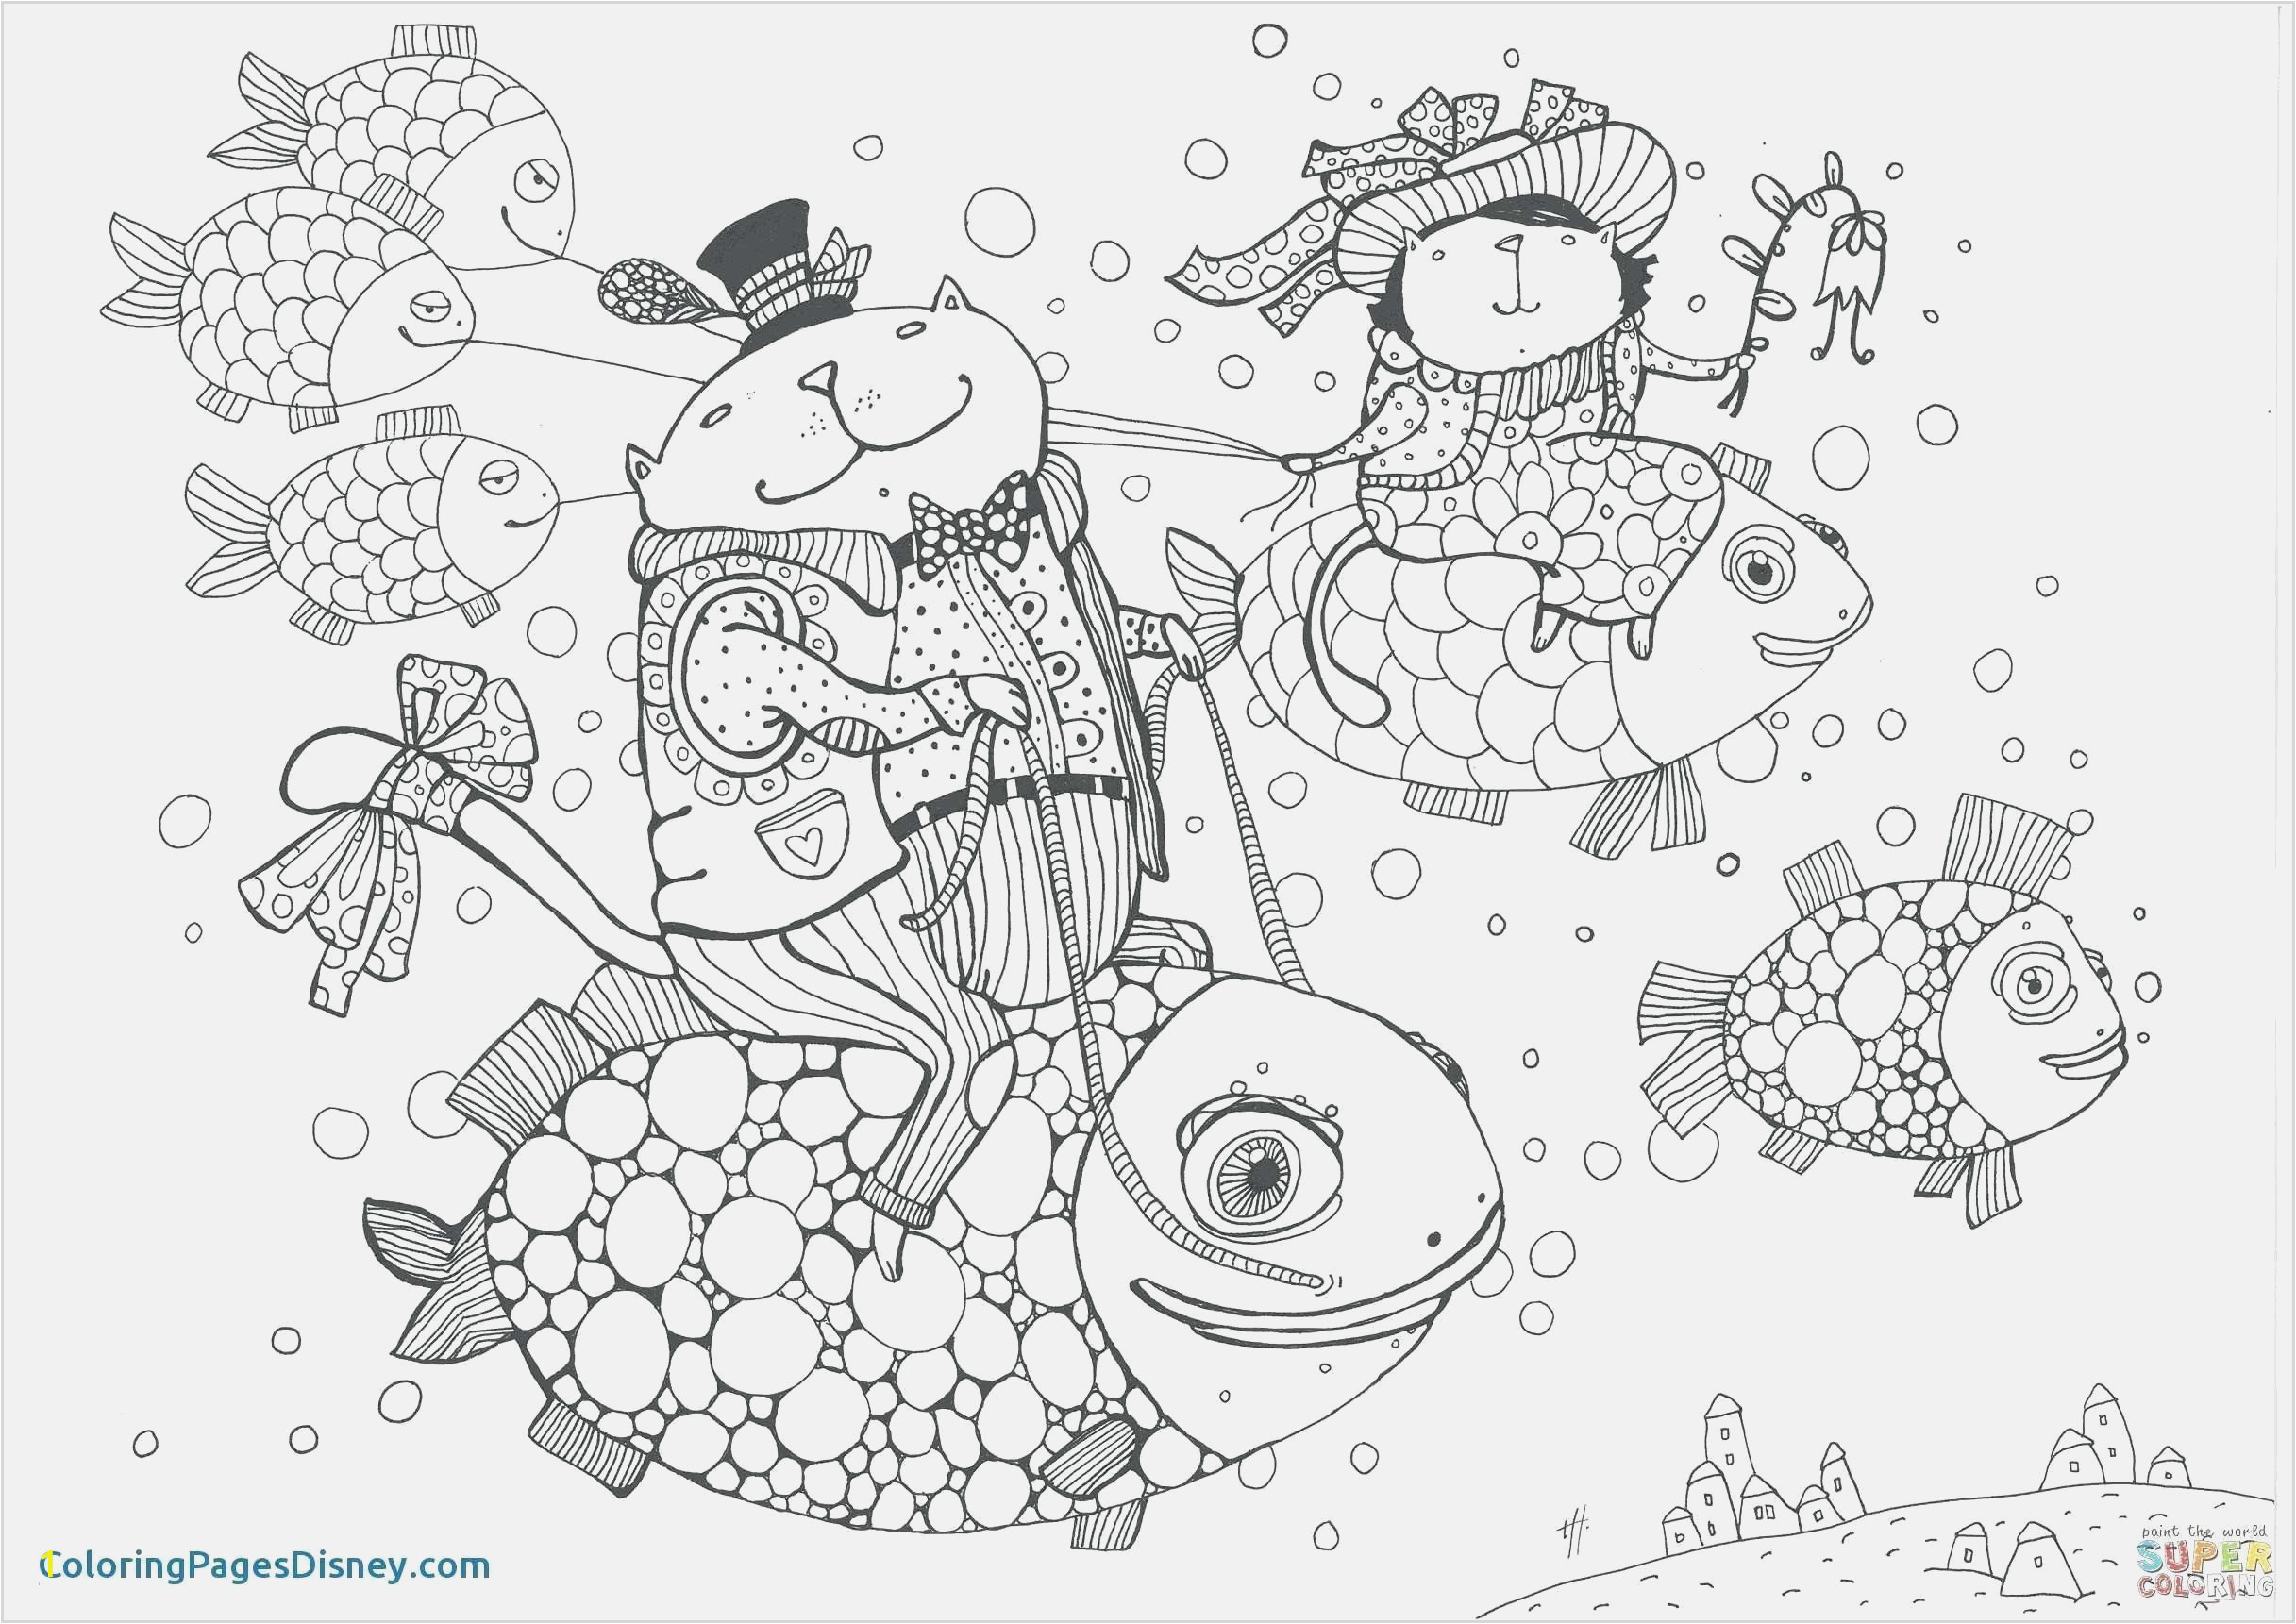 Realistic Squirrel Coloring Page Poppy Coloring Pages Print at Coloring Pages